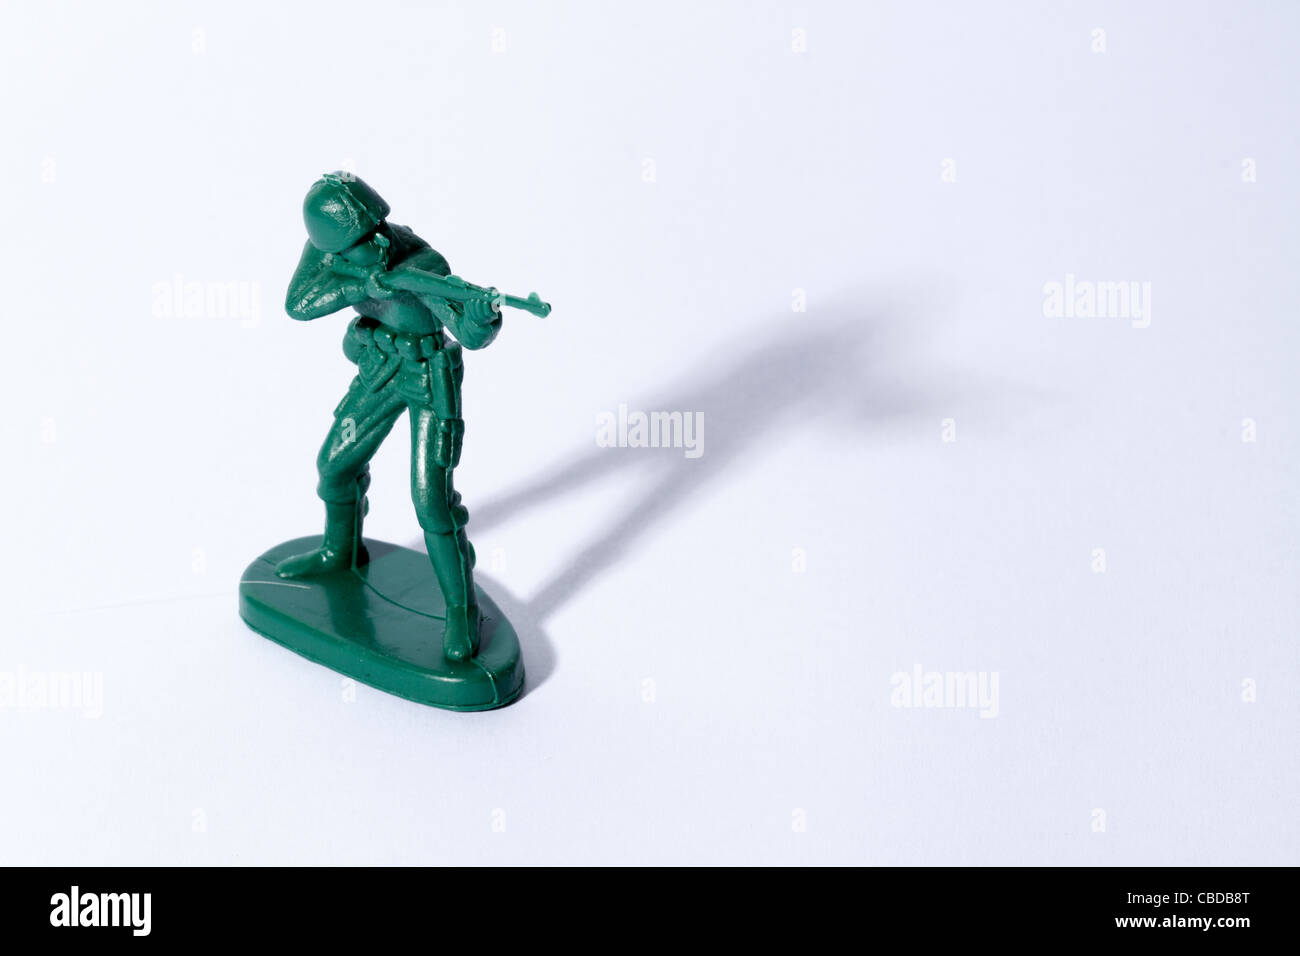 Plastic Toy Soldiers, Army figures fighting on a white background Stock Photo